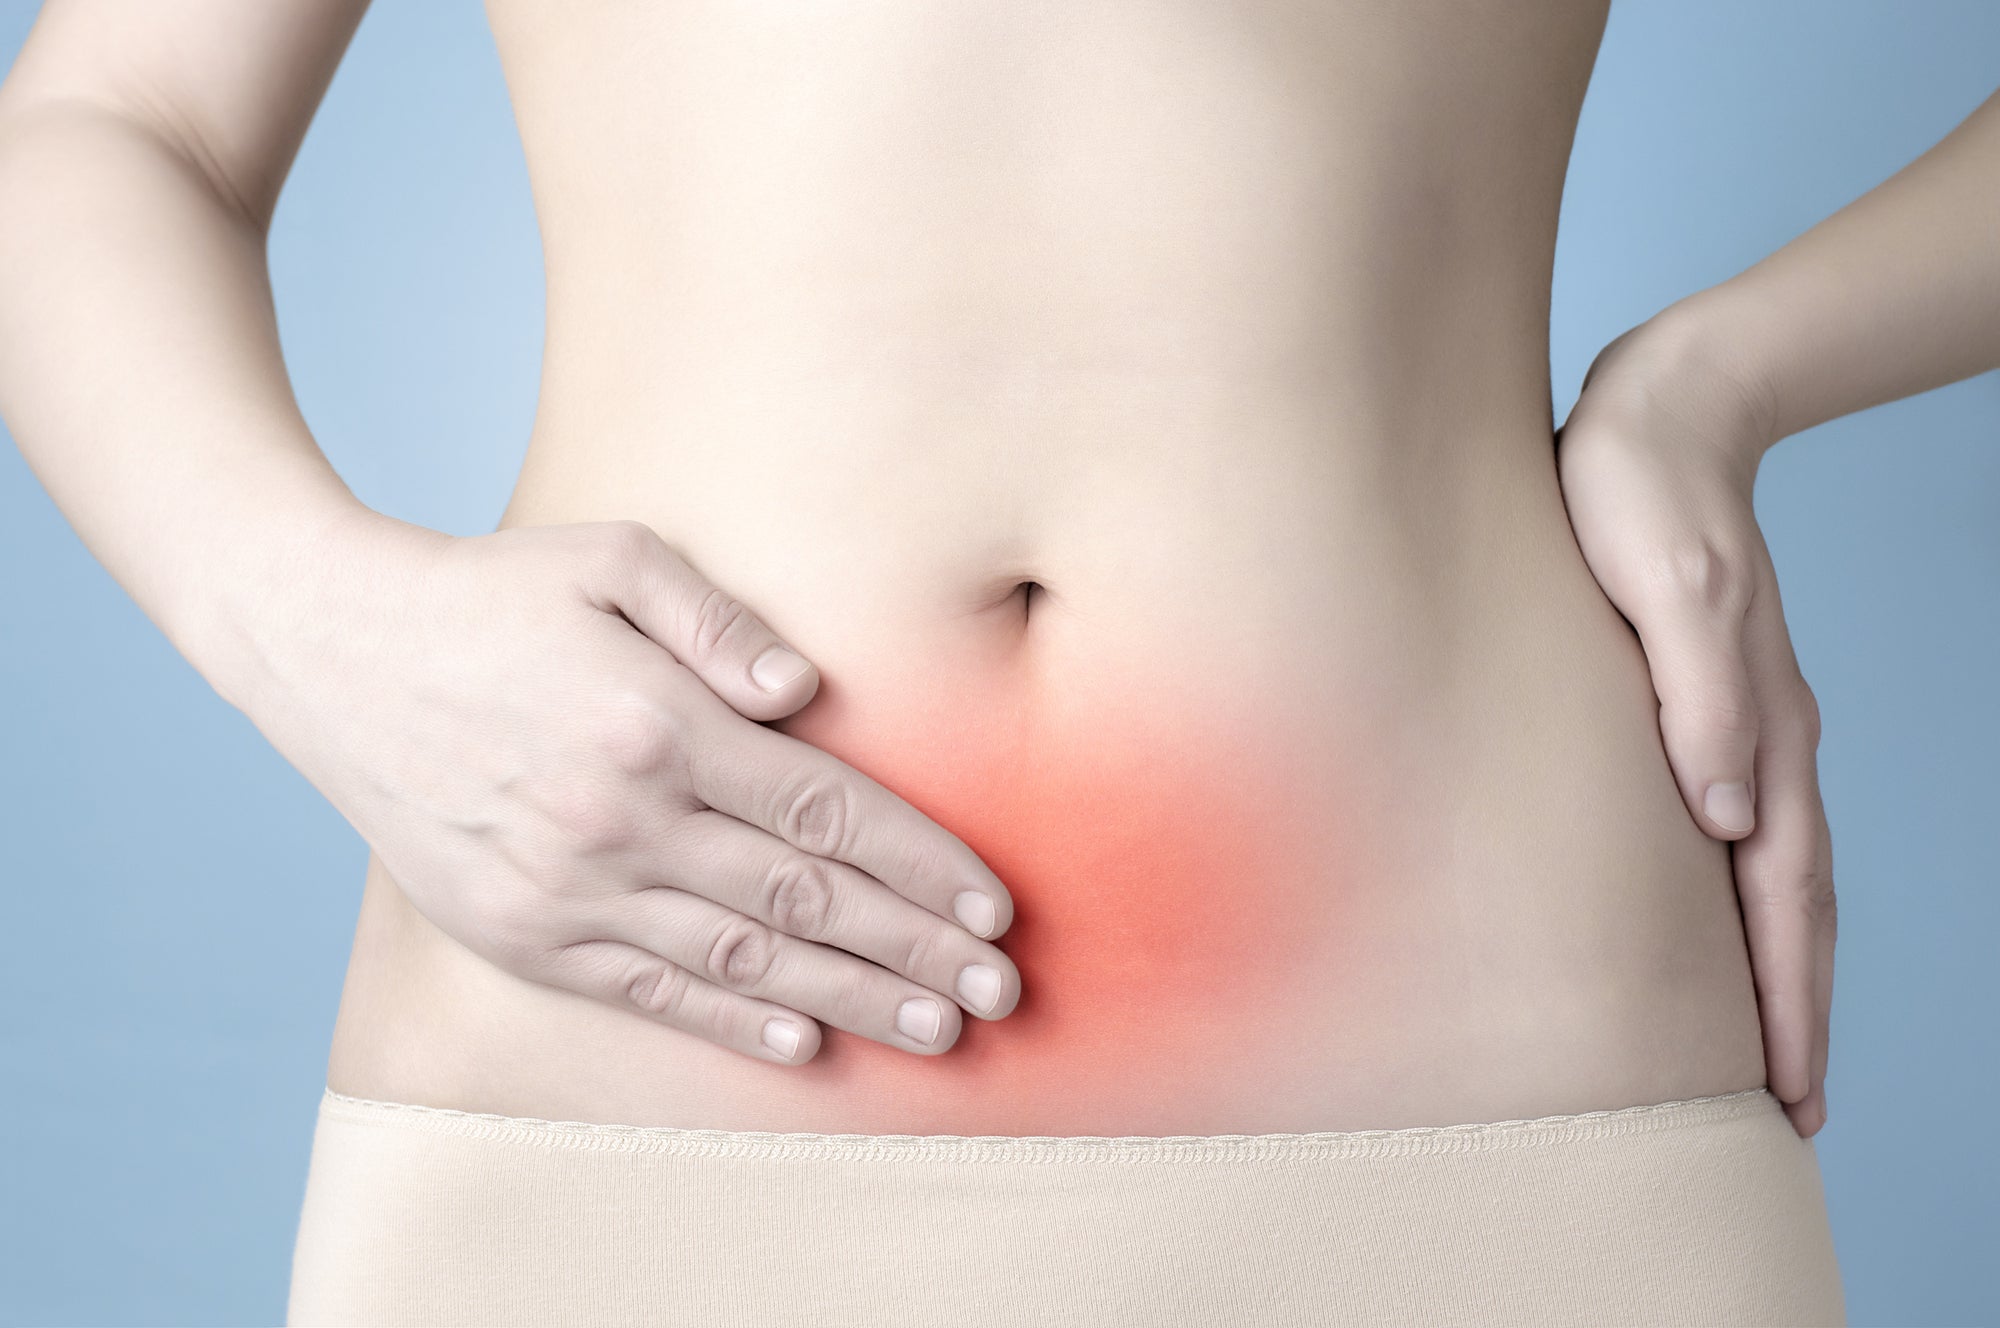 Chinese Medicine: The science behind the effective treatment and management of Endometriosis.